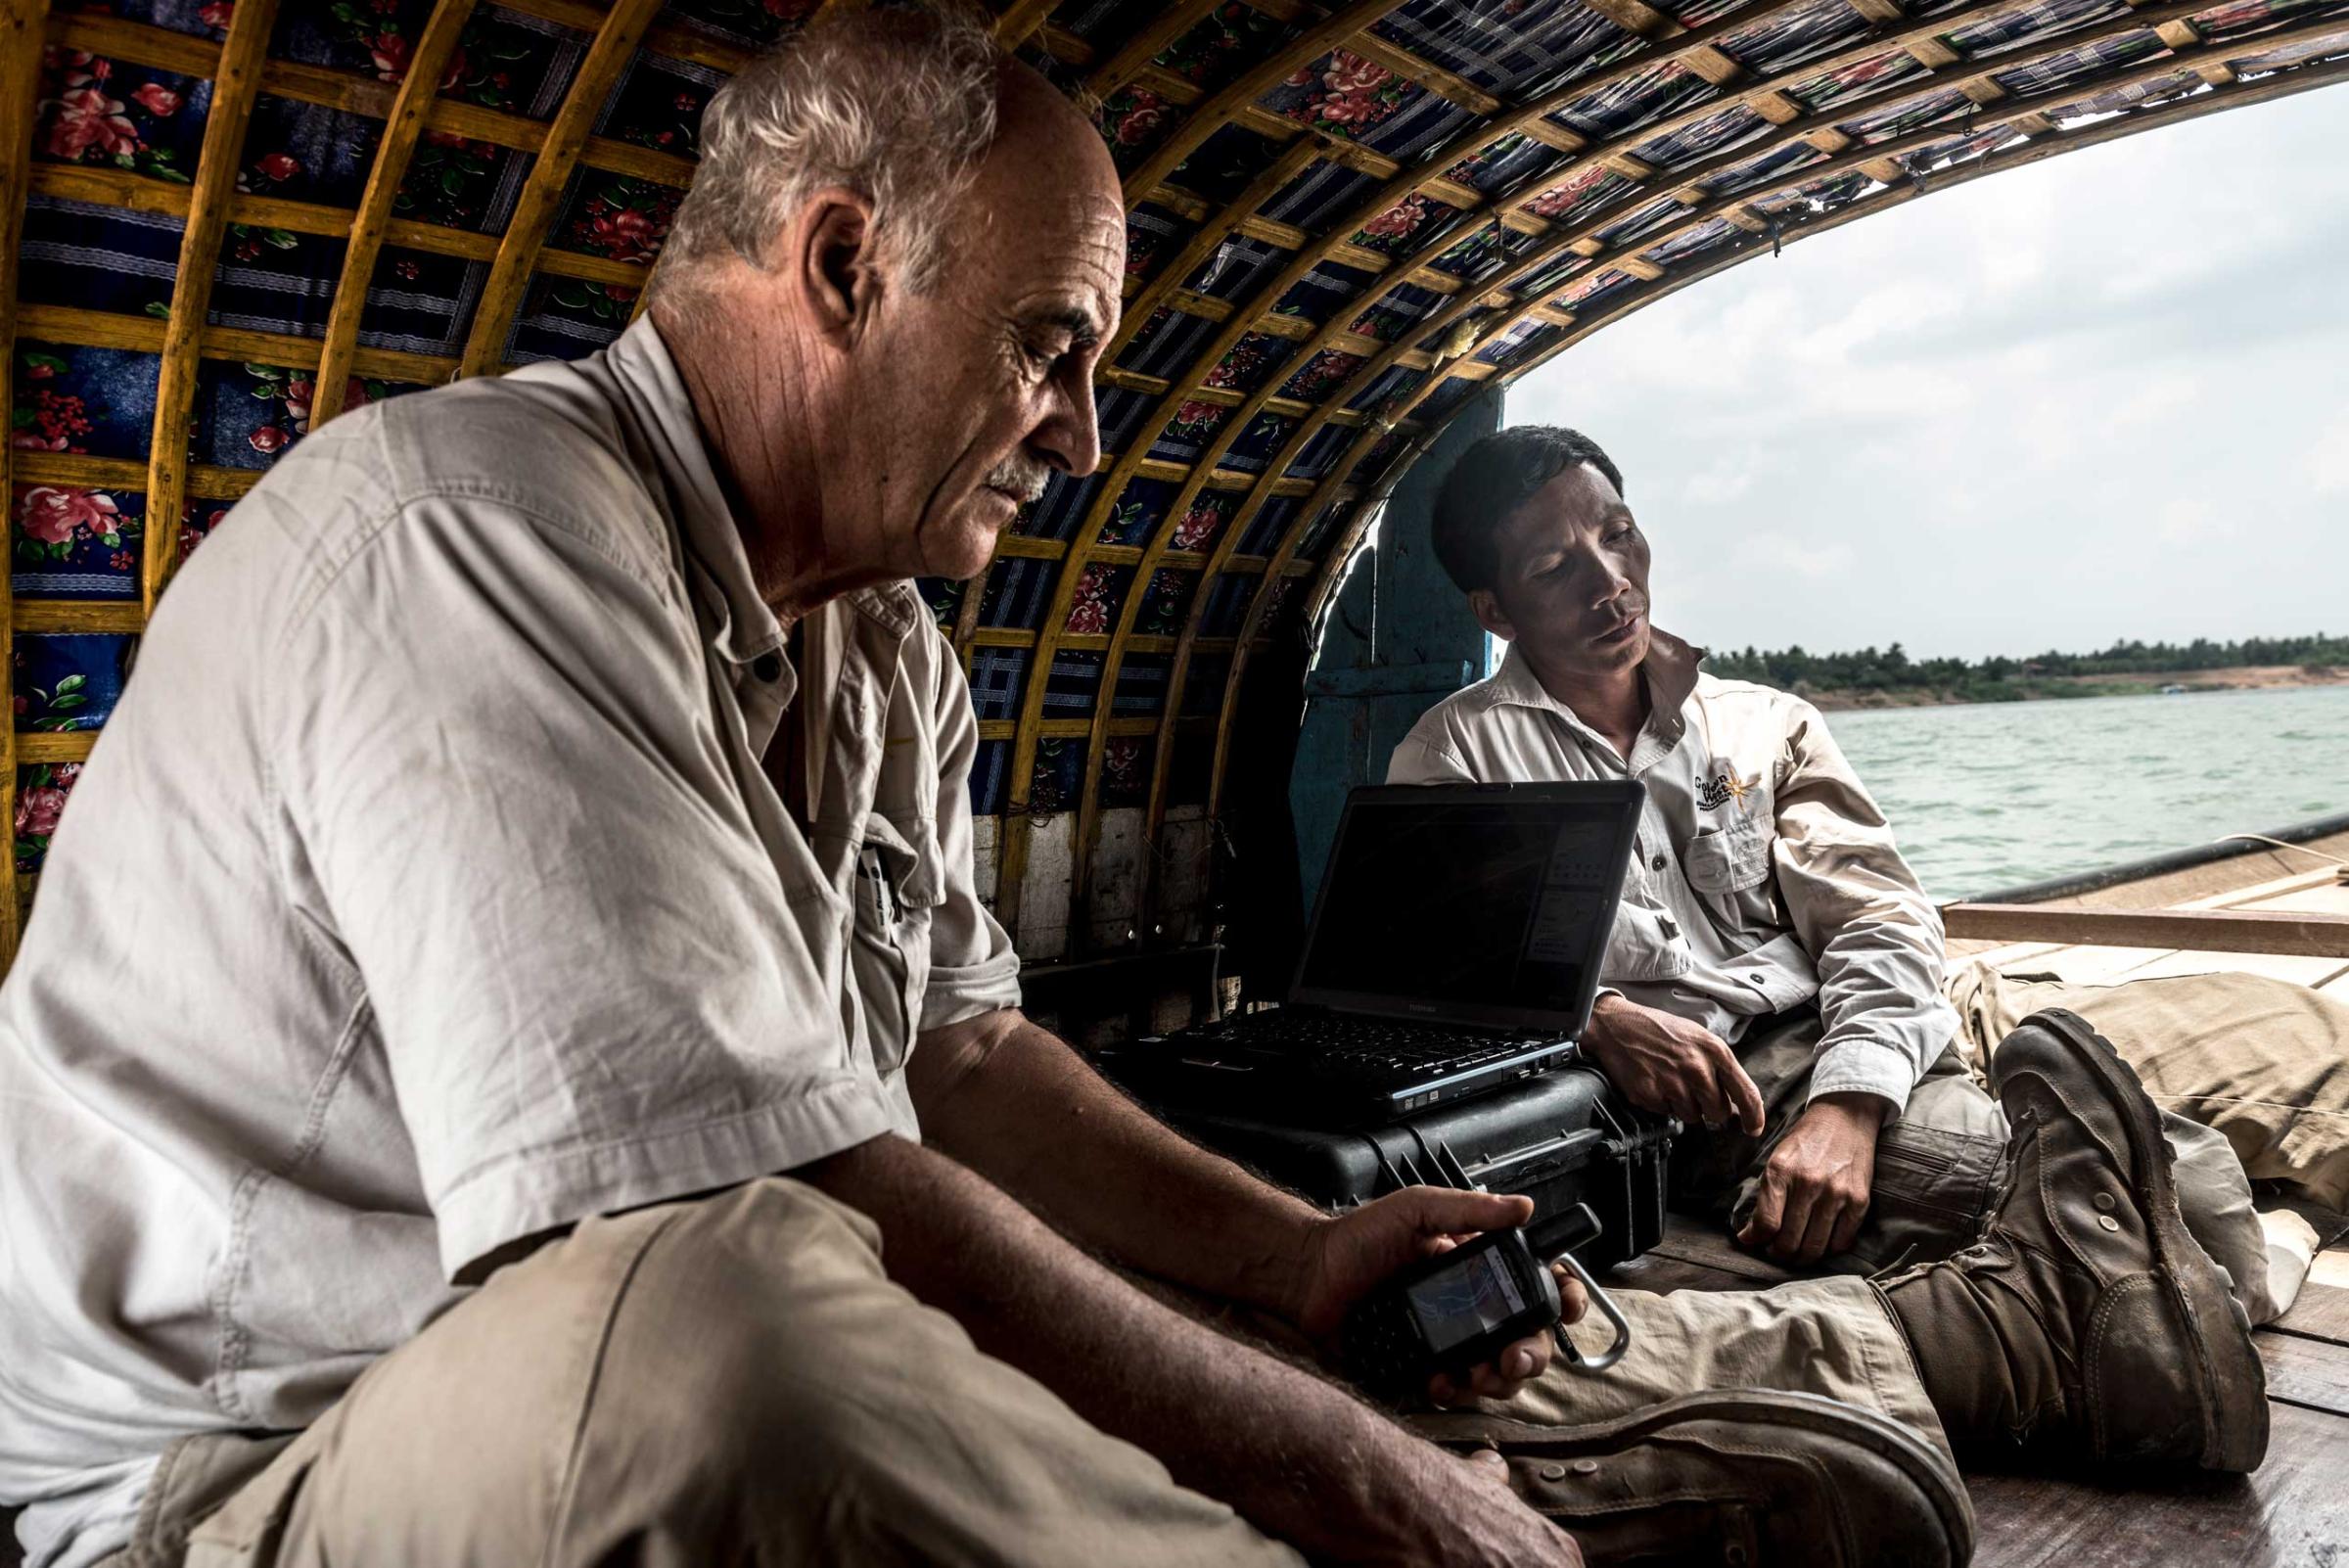 Marcel Durocher and Heang Sambo, employees of Golden West Humanitarian Organization, spend up to six hours a day on a boat when on a river survey. Using Sonar, Marcel and Sambo map the riverbed identifying sunken boats and potential UXO in April 2015. The Tonle Sap and Mekong rivers move vast amounts of sediment, making the process of scanning the river beds difficult, what is identified one year can be covered by sediment the next.